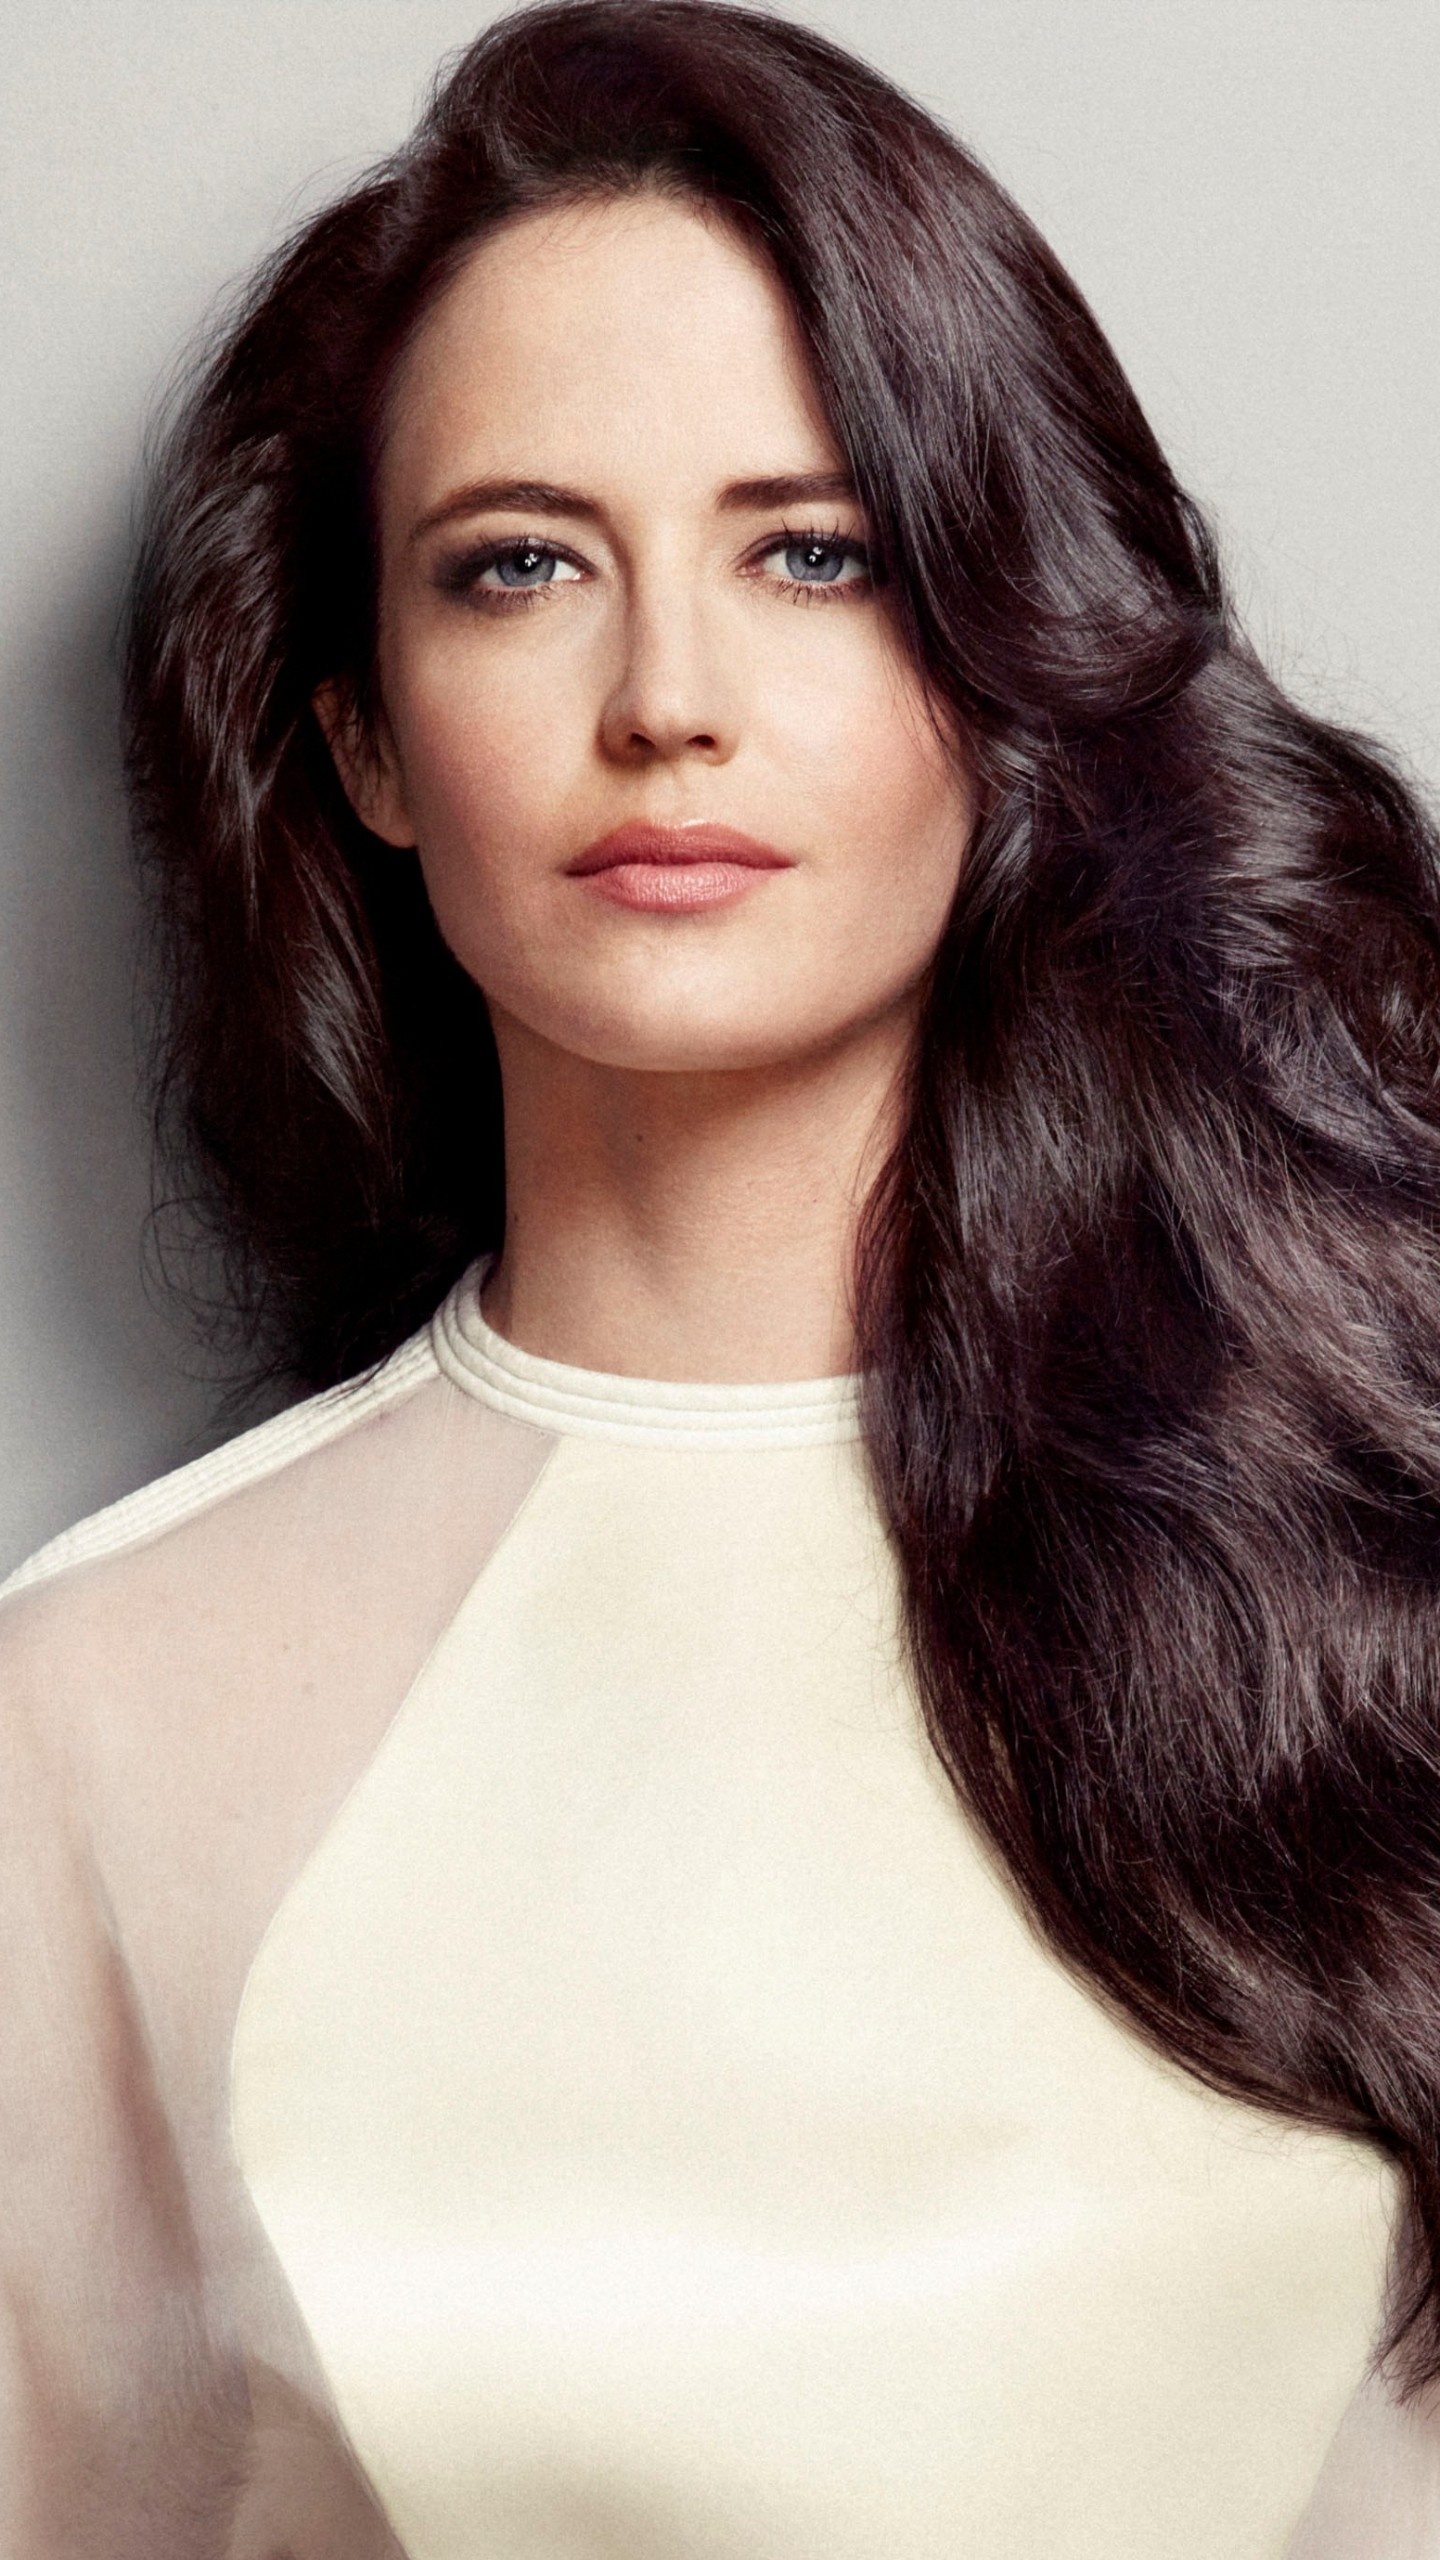 Eva Green: Was cast for the role of Vesper Lynd in the 2006 James Bond film Casino Royale. 1440x2560 HD Wallpaper.